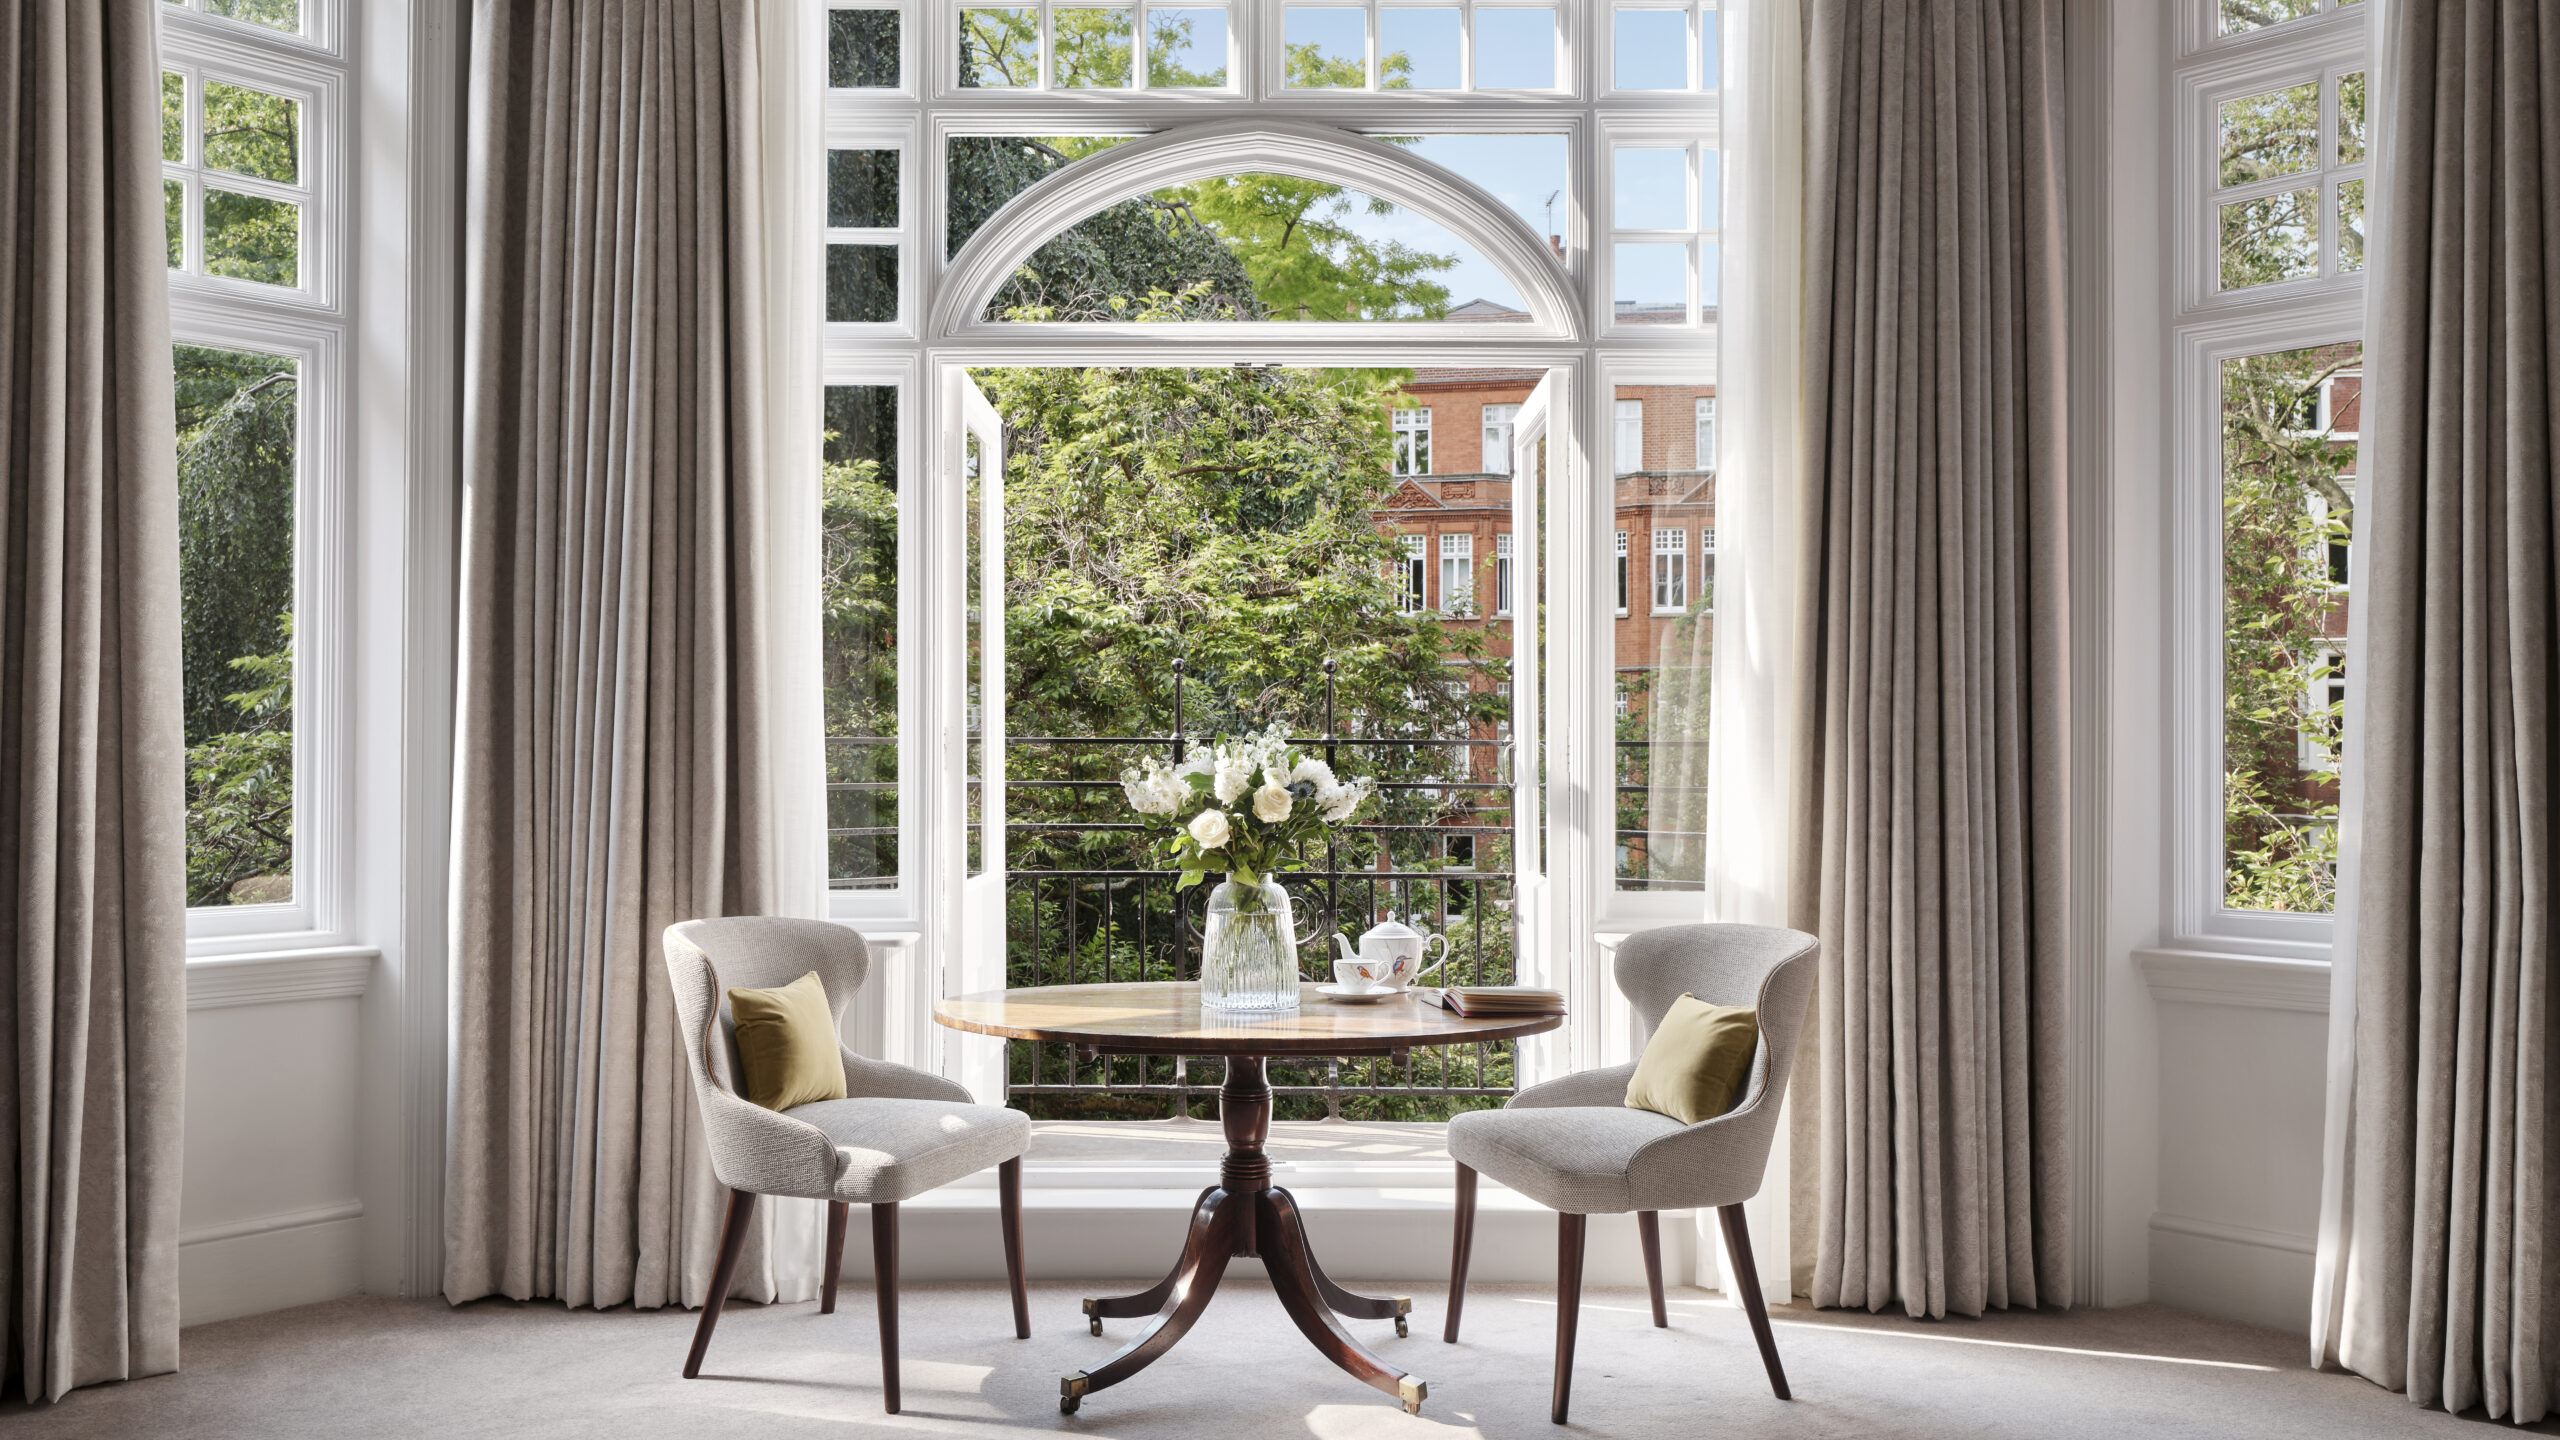 A guest room at The Chelsea townhouse looking out into the garden